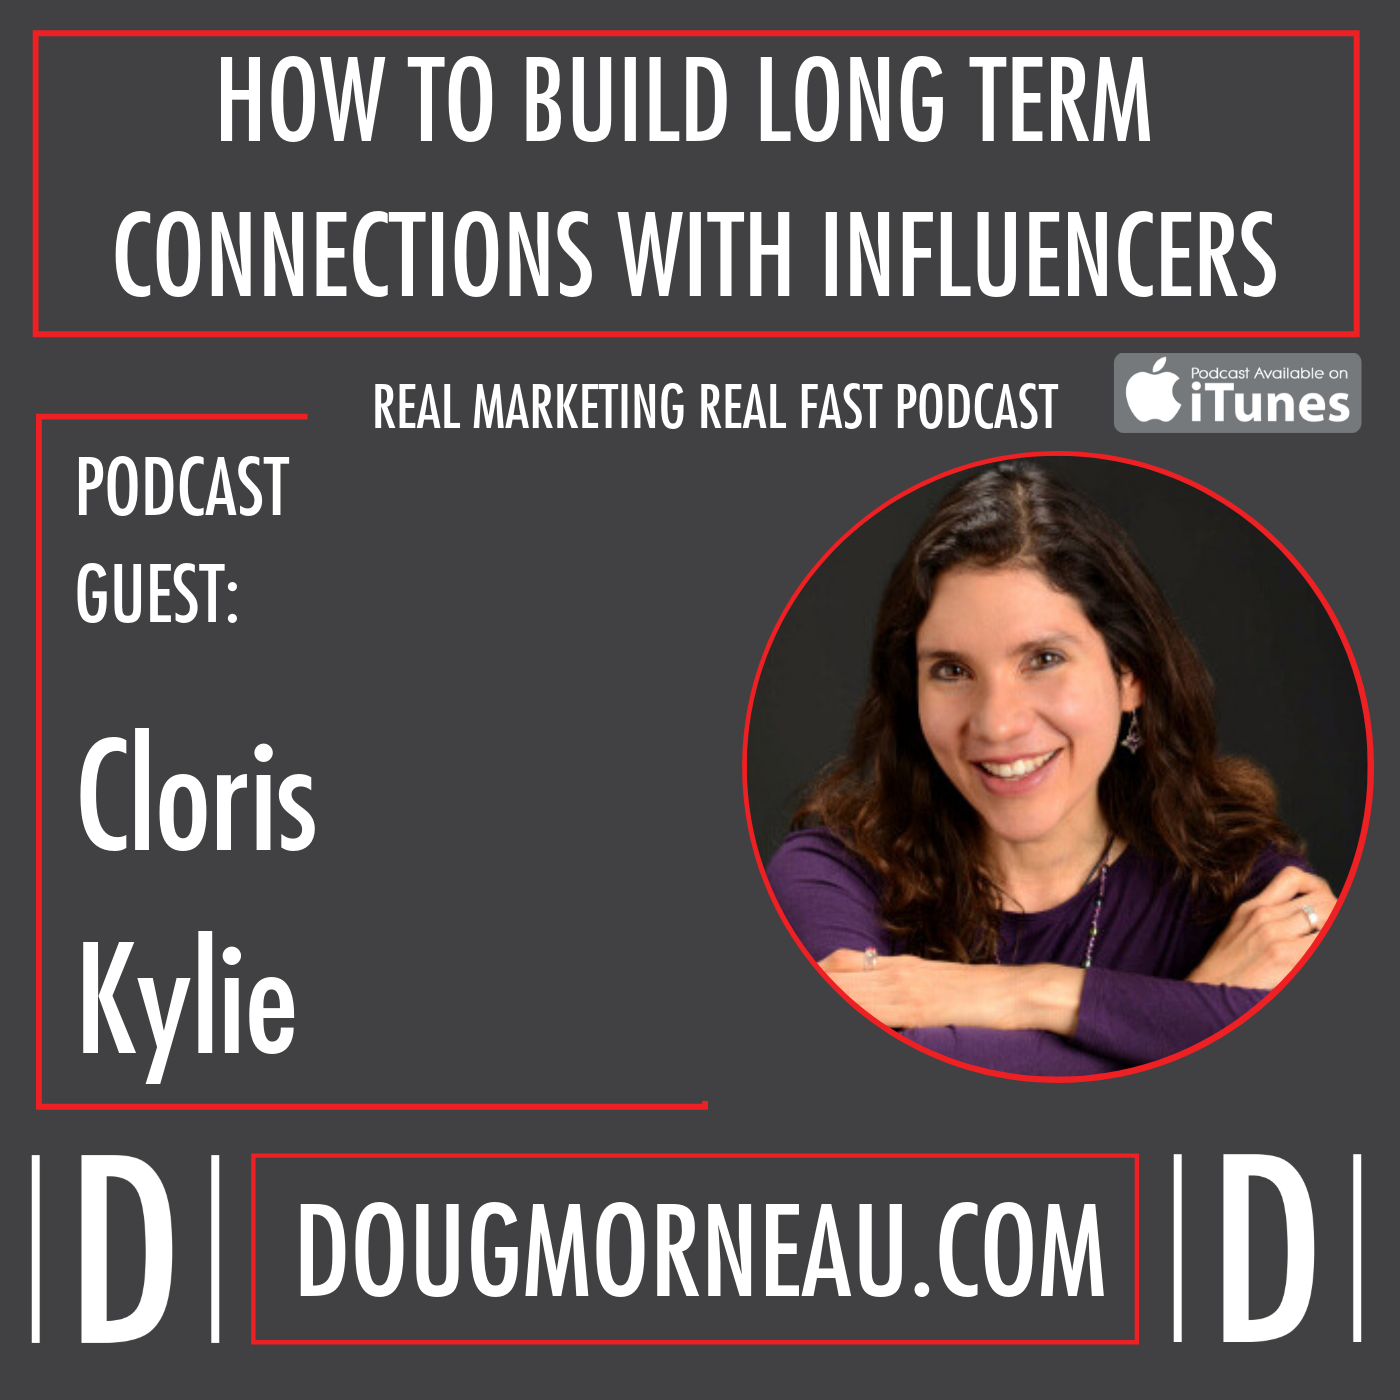 HOW TO BUILD LONG TERM CONNECTIONS WITH INFLUENCERS CLORIS KYLIE - DOUG MORNEAU - REAL MARKETING REAL FAST PODCAST